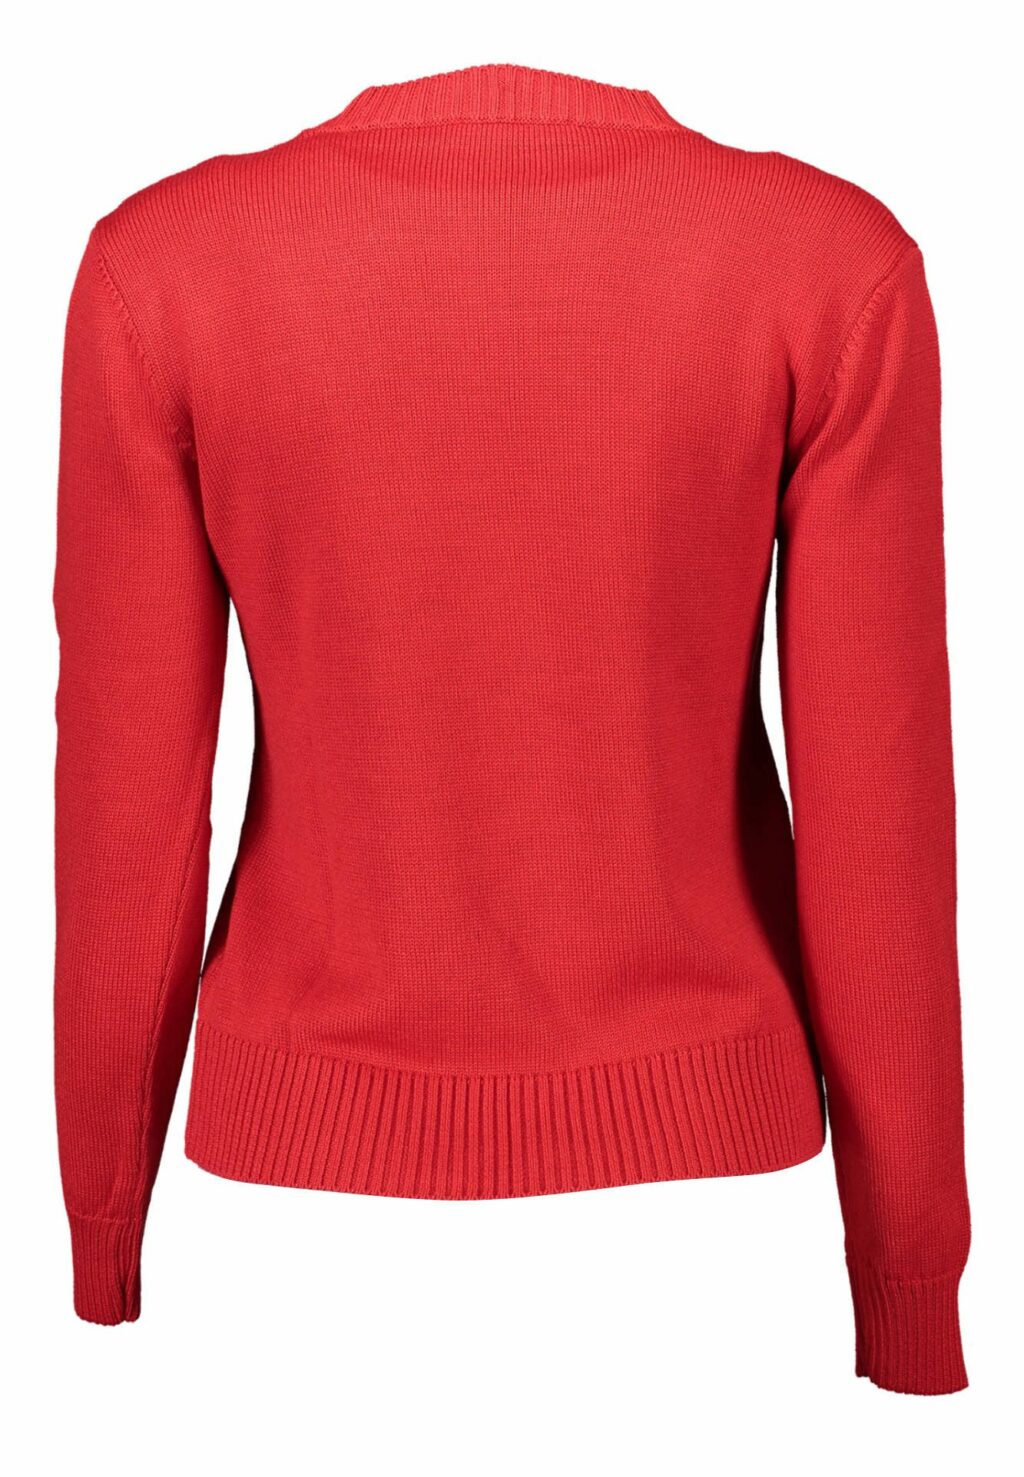 GAELLE PARIS RED WOMAN SWEATER GBD9800_ROSSO_ROSSO